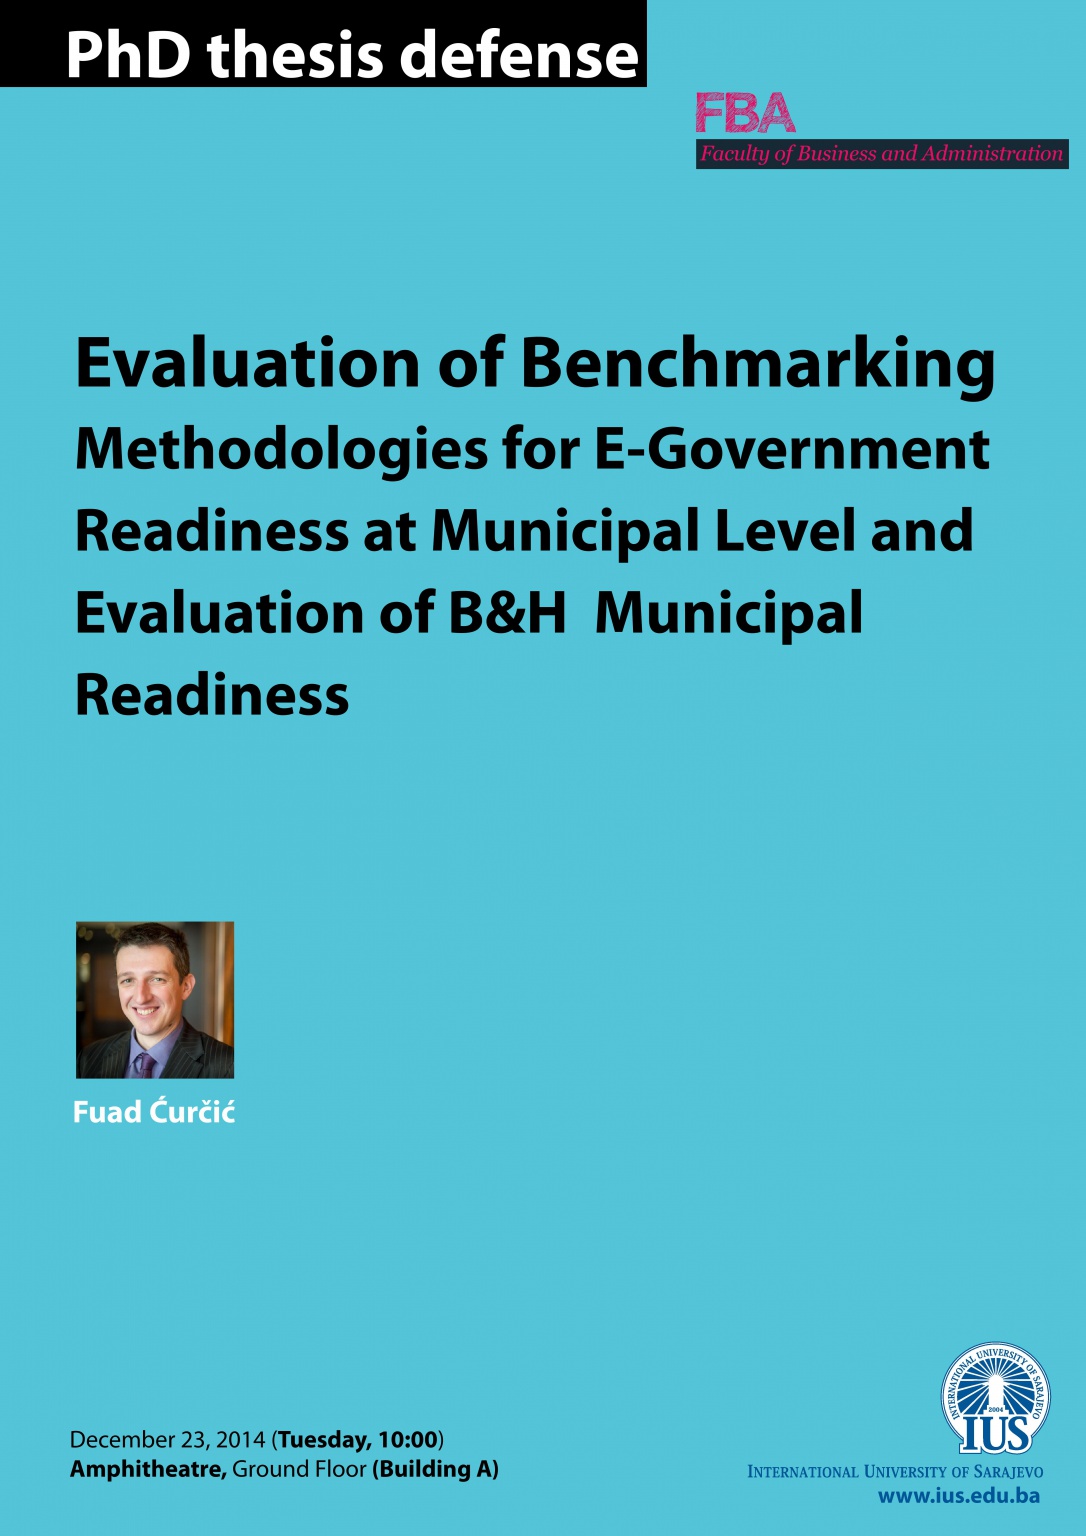  PhD thesis defense - Evaluation of Benchmarking Methodologies for E-Government Readiness at Municipal Level and Evaluation of B&H Municipal Readiness 